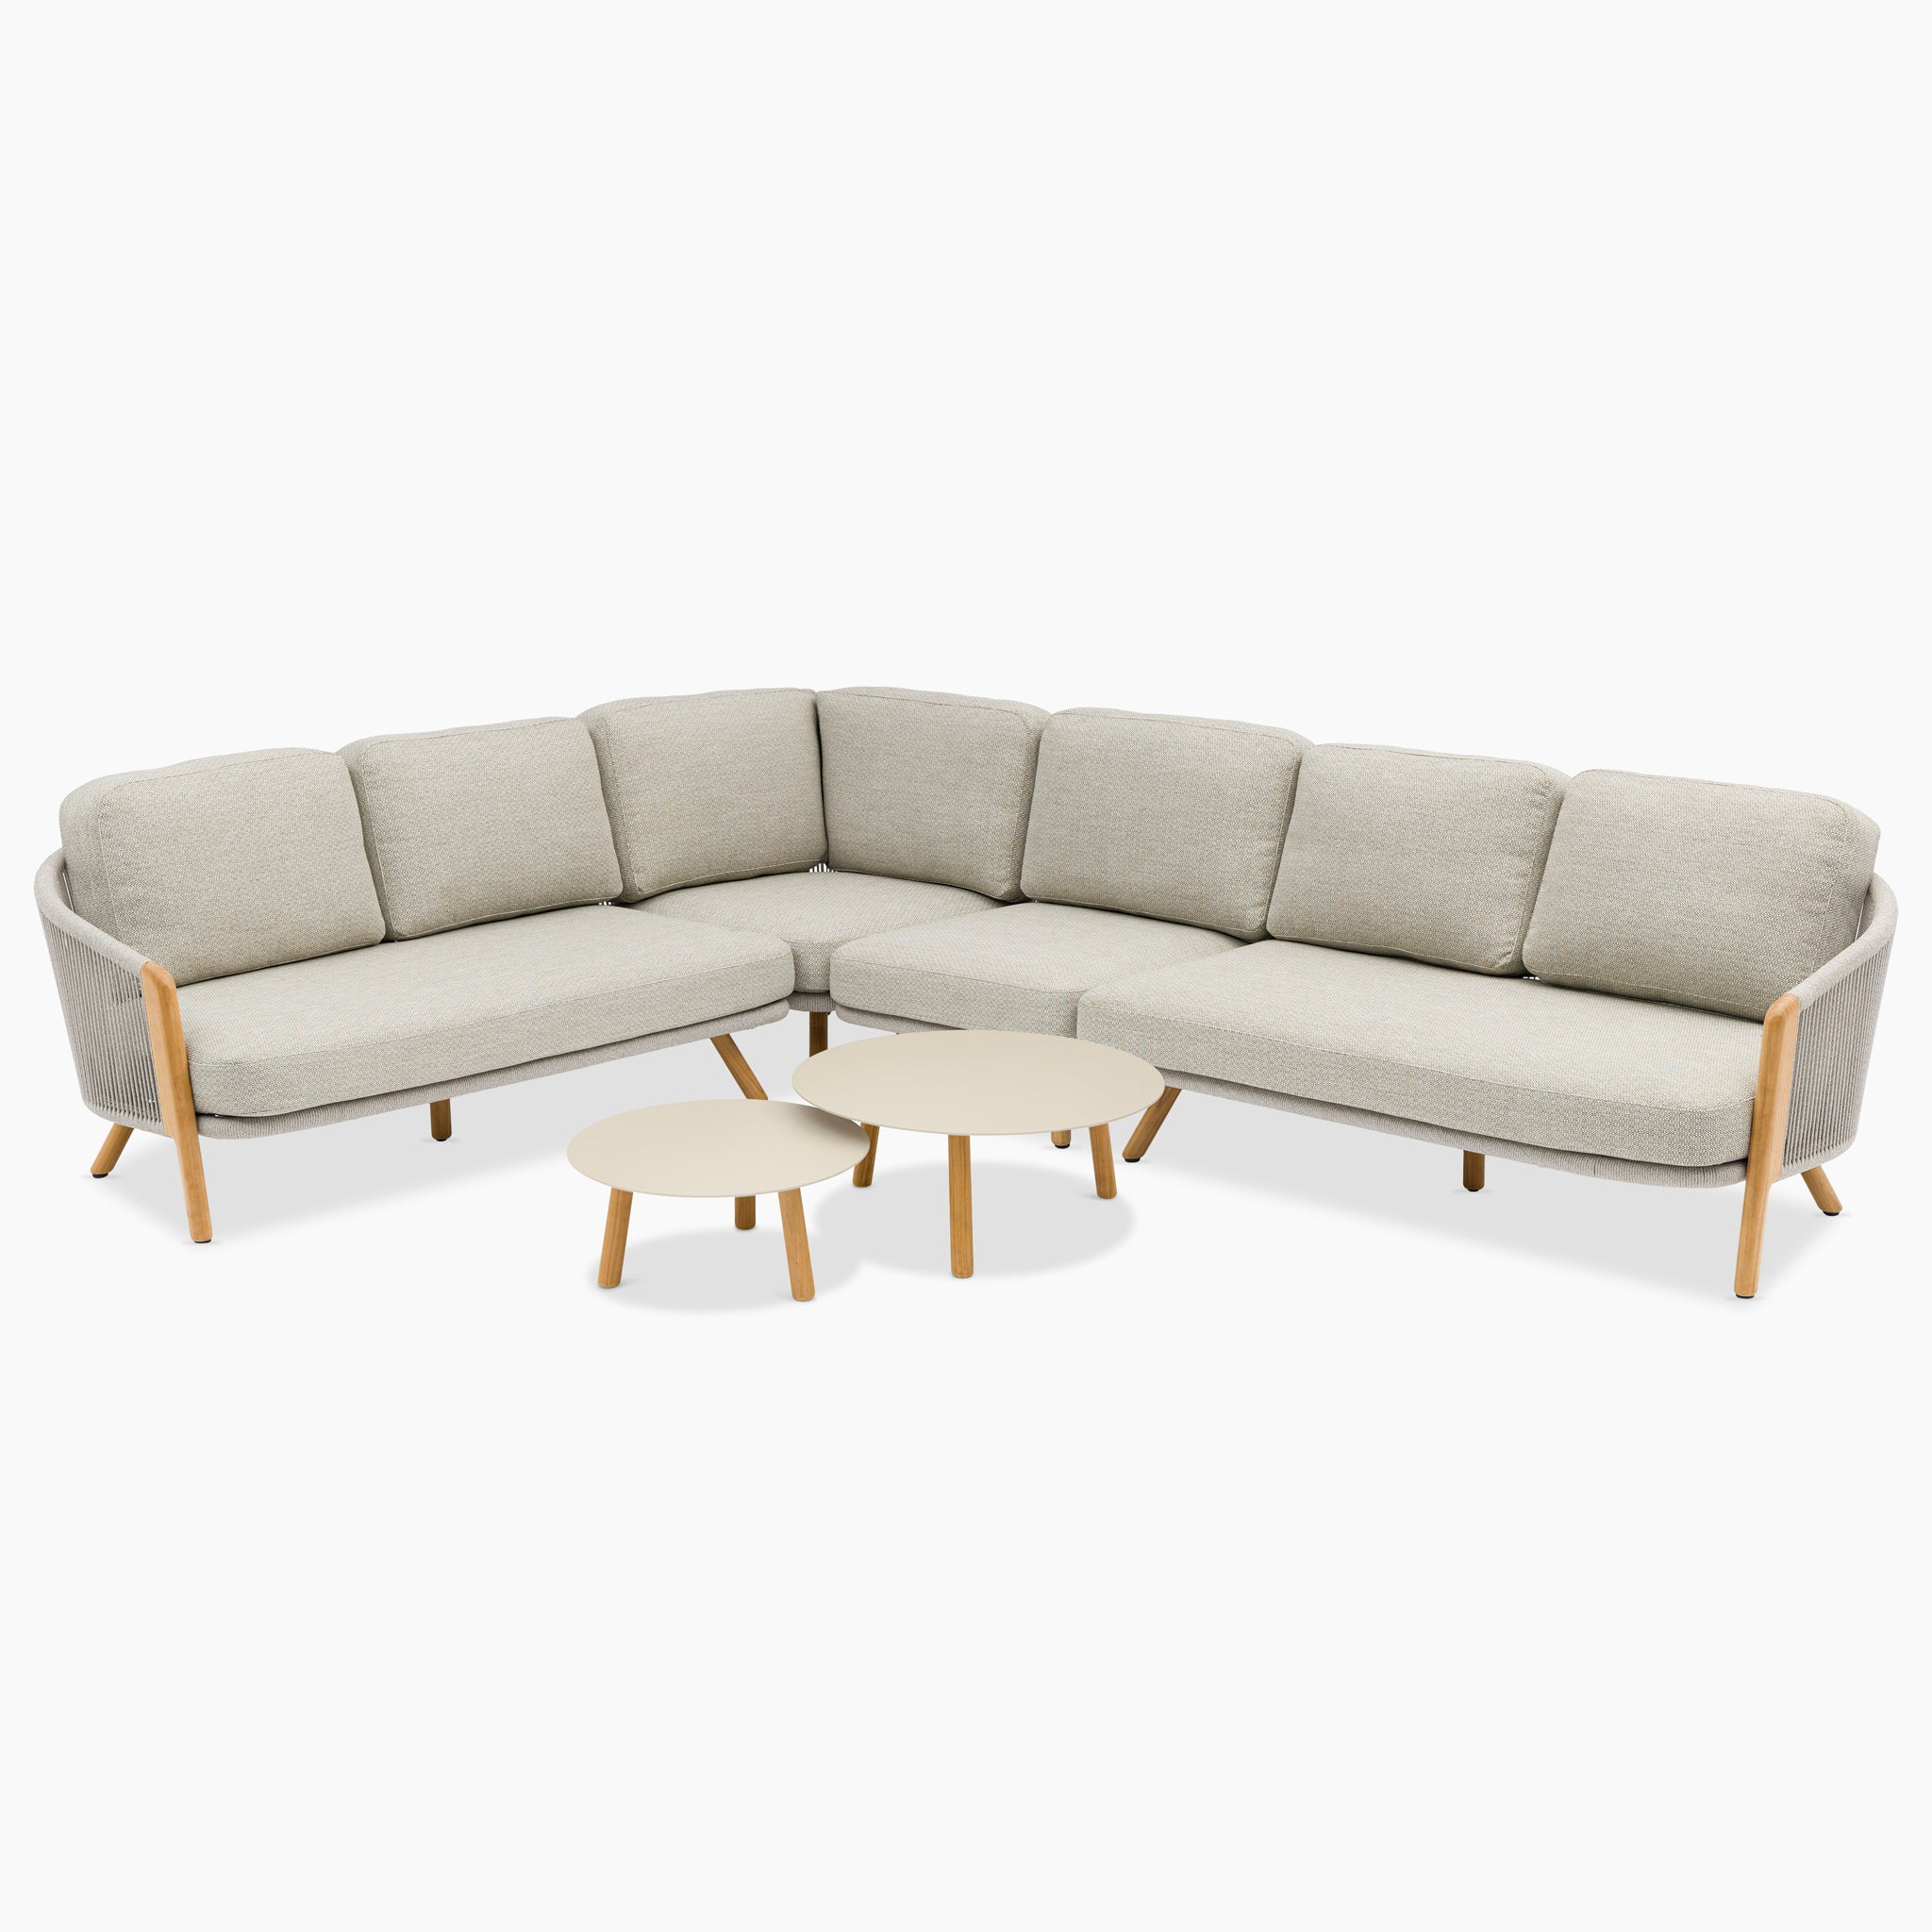 Merano Large Corner Group Set with Coffee Table in Latte